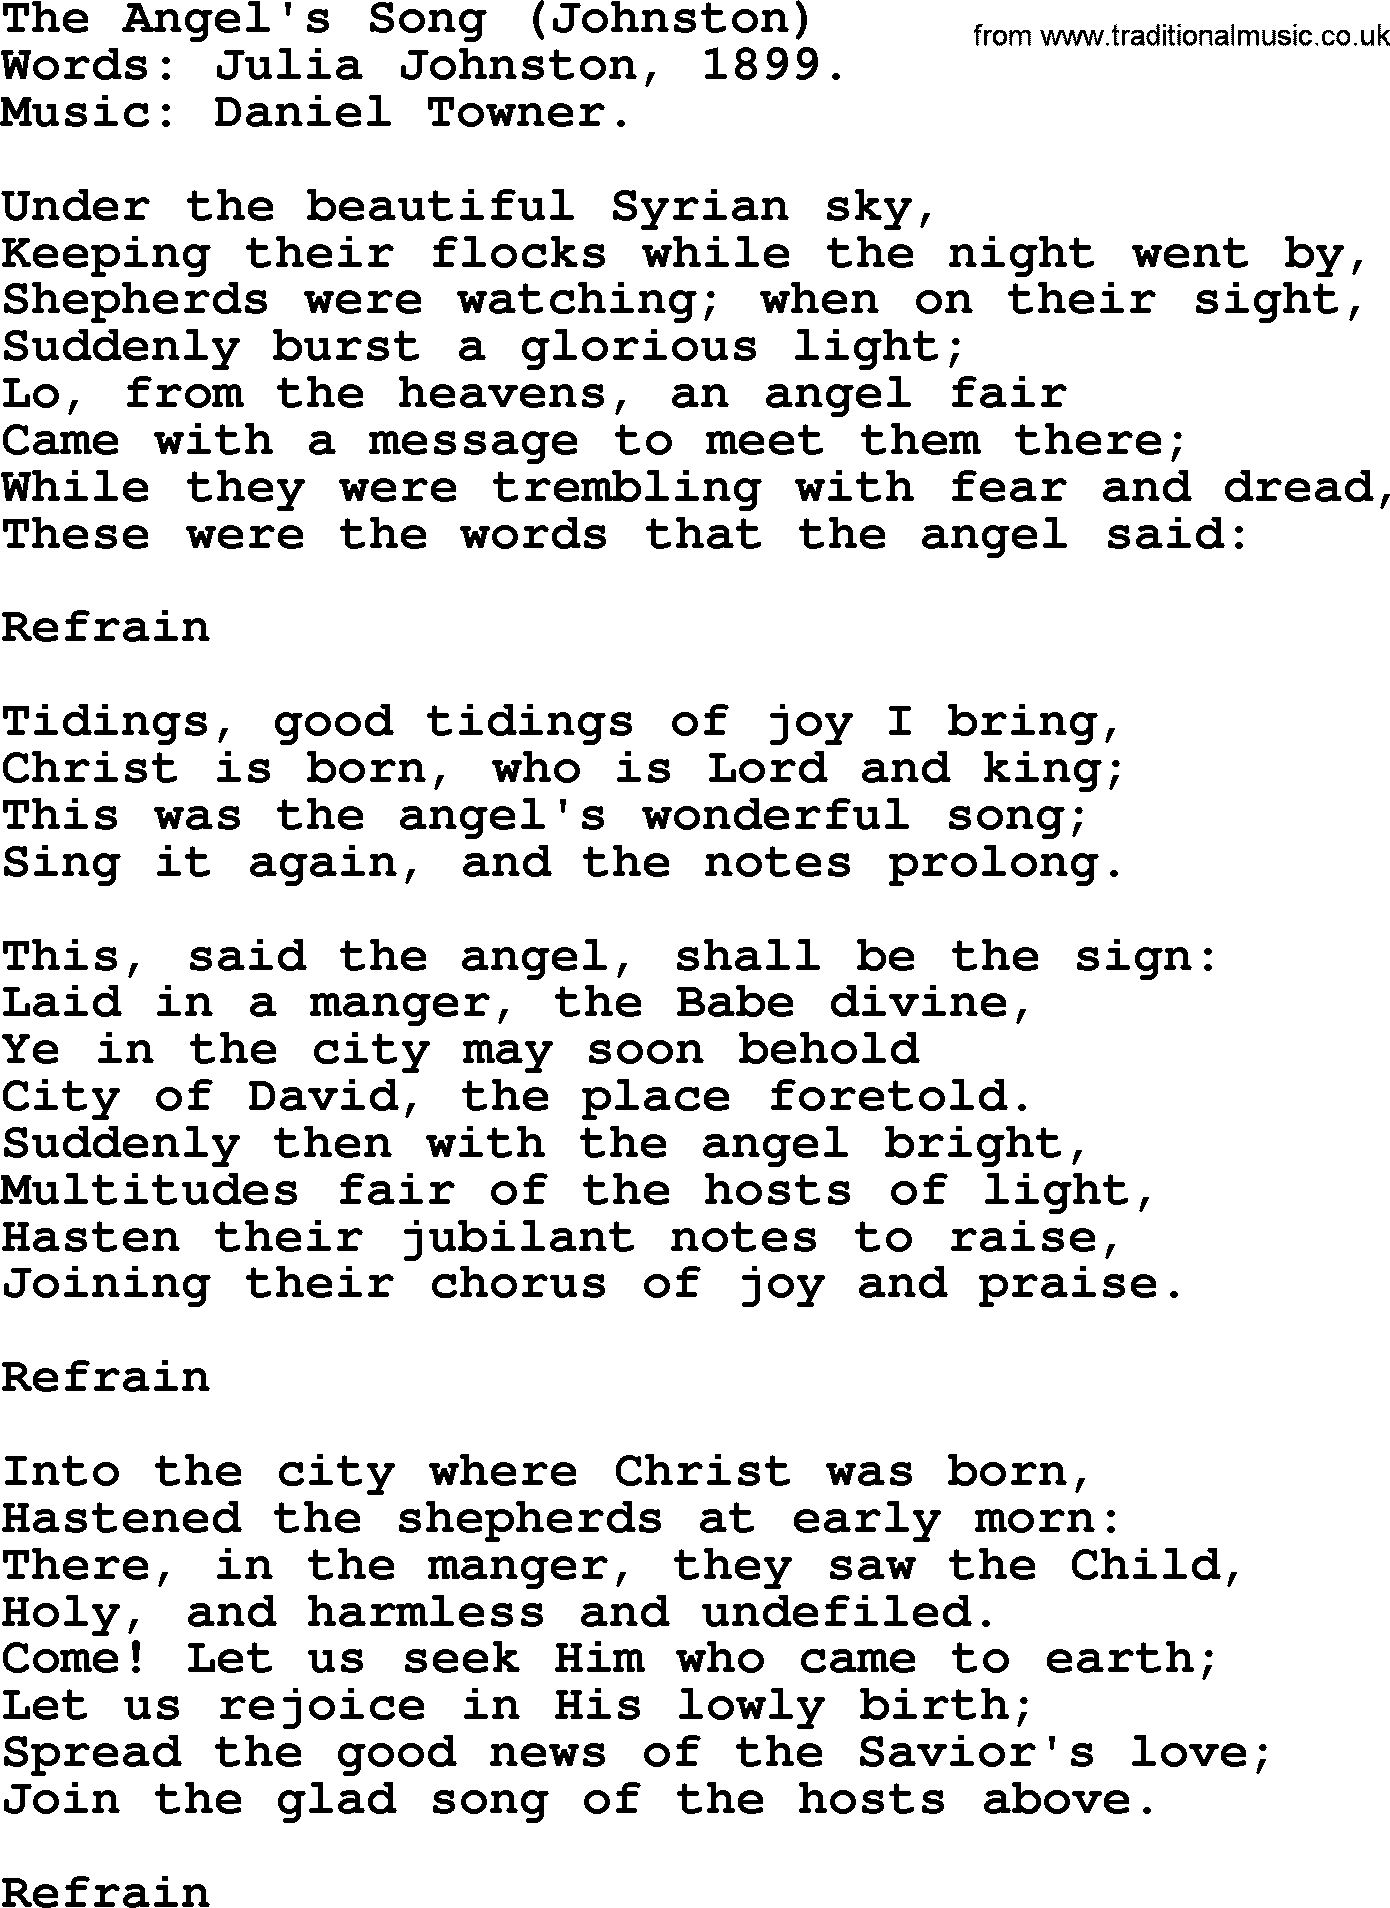 Christmas Hymns, Carols and Songs, title: The Angel's Song (johnston) - complete lyrics, and PDF